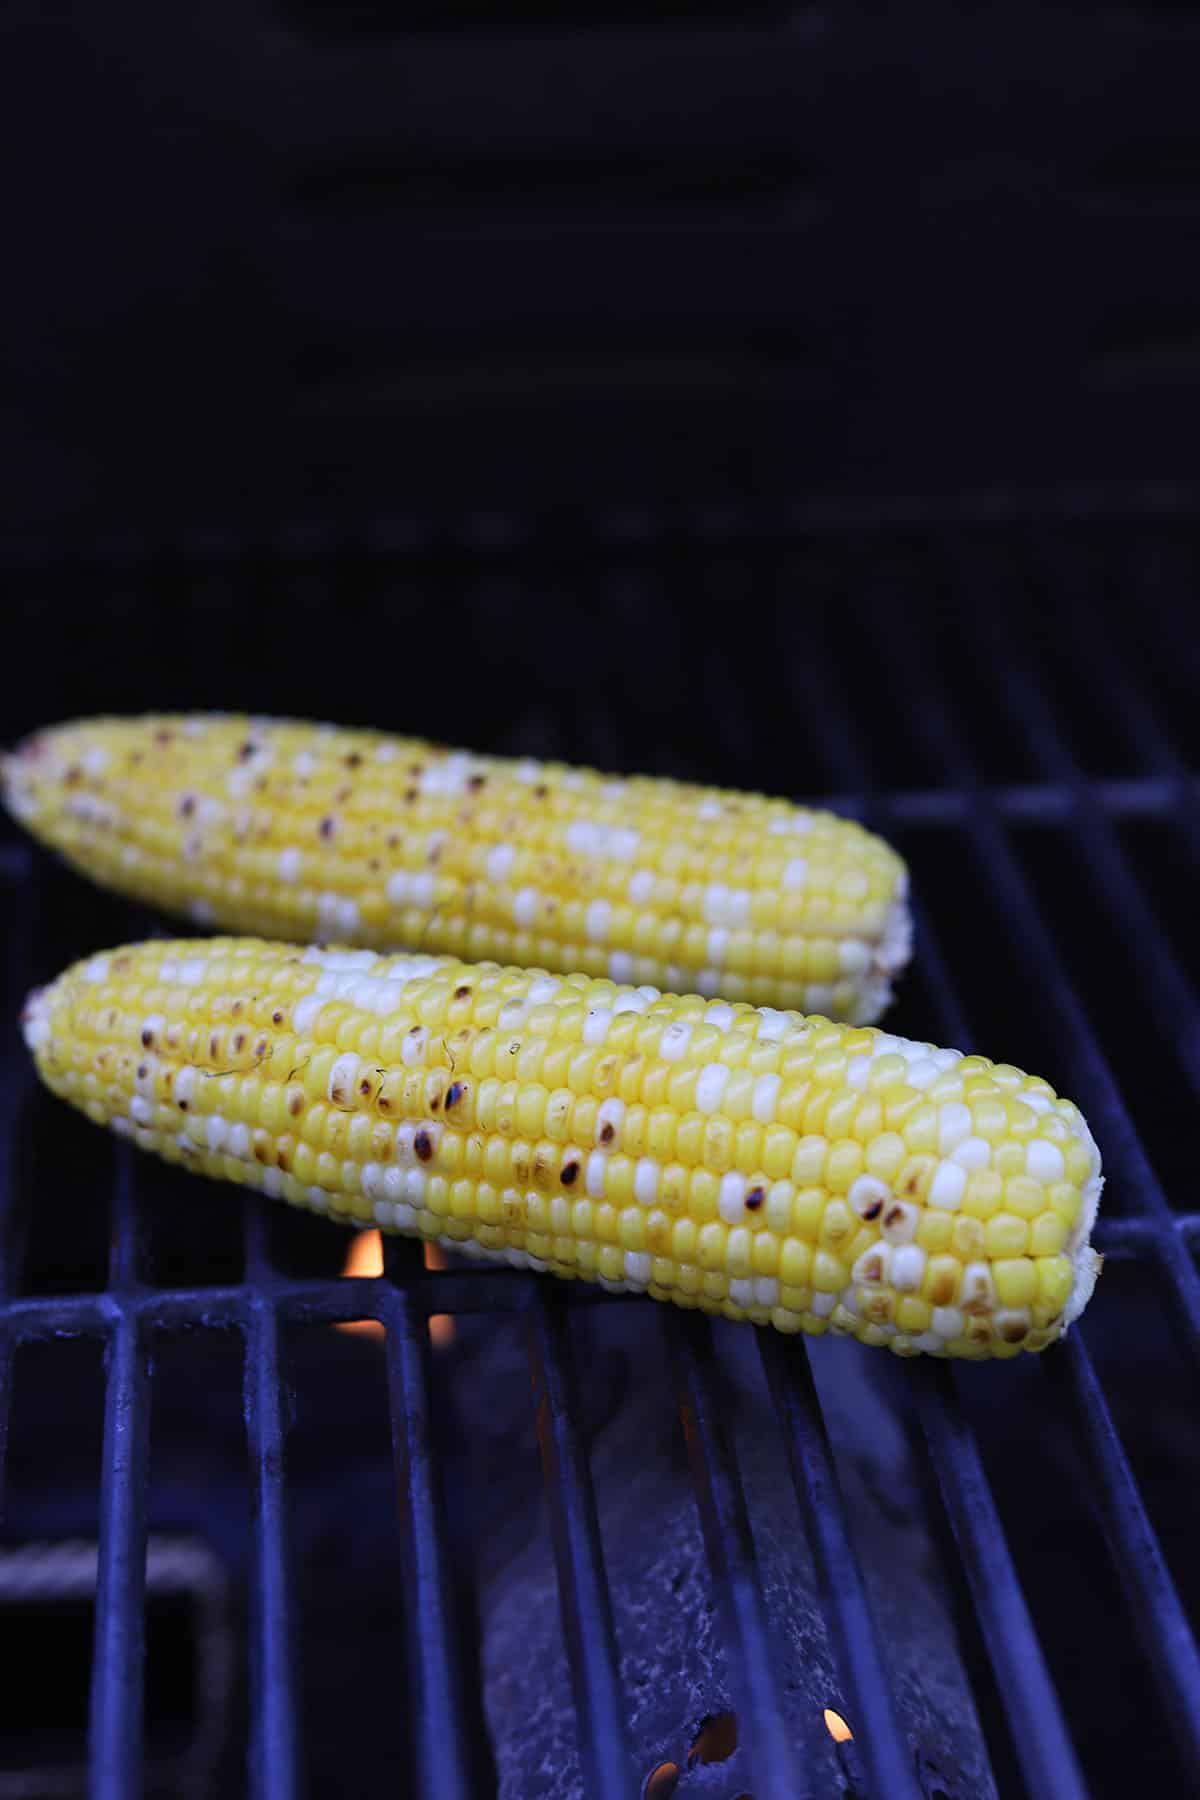 Ears of corn on grill grate.